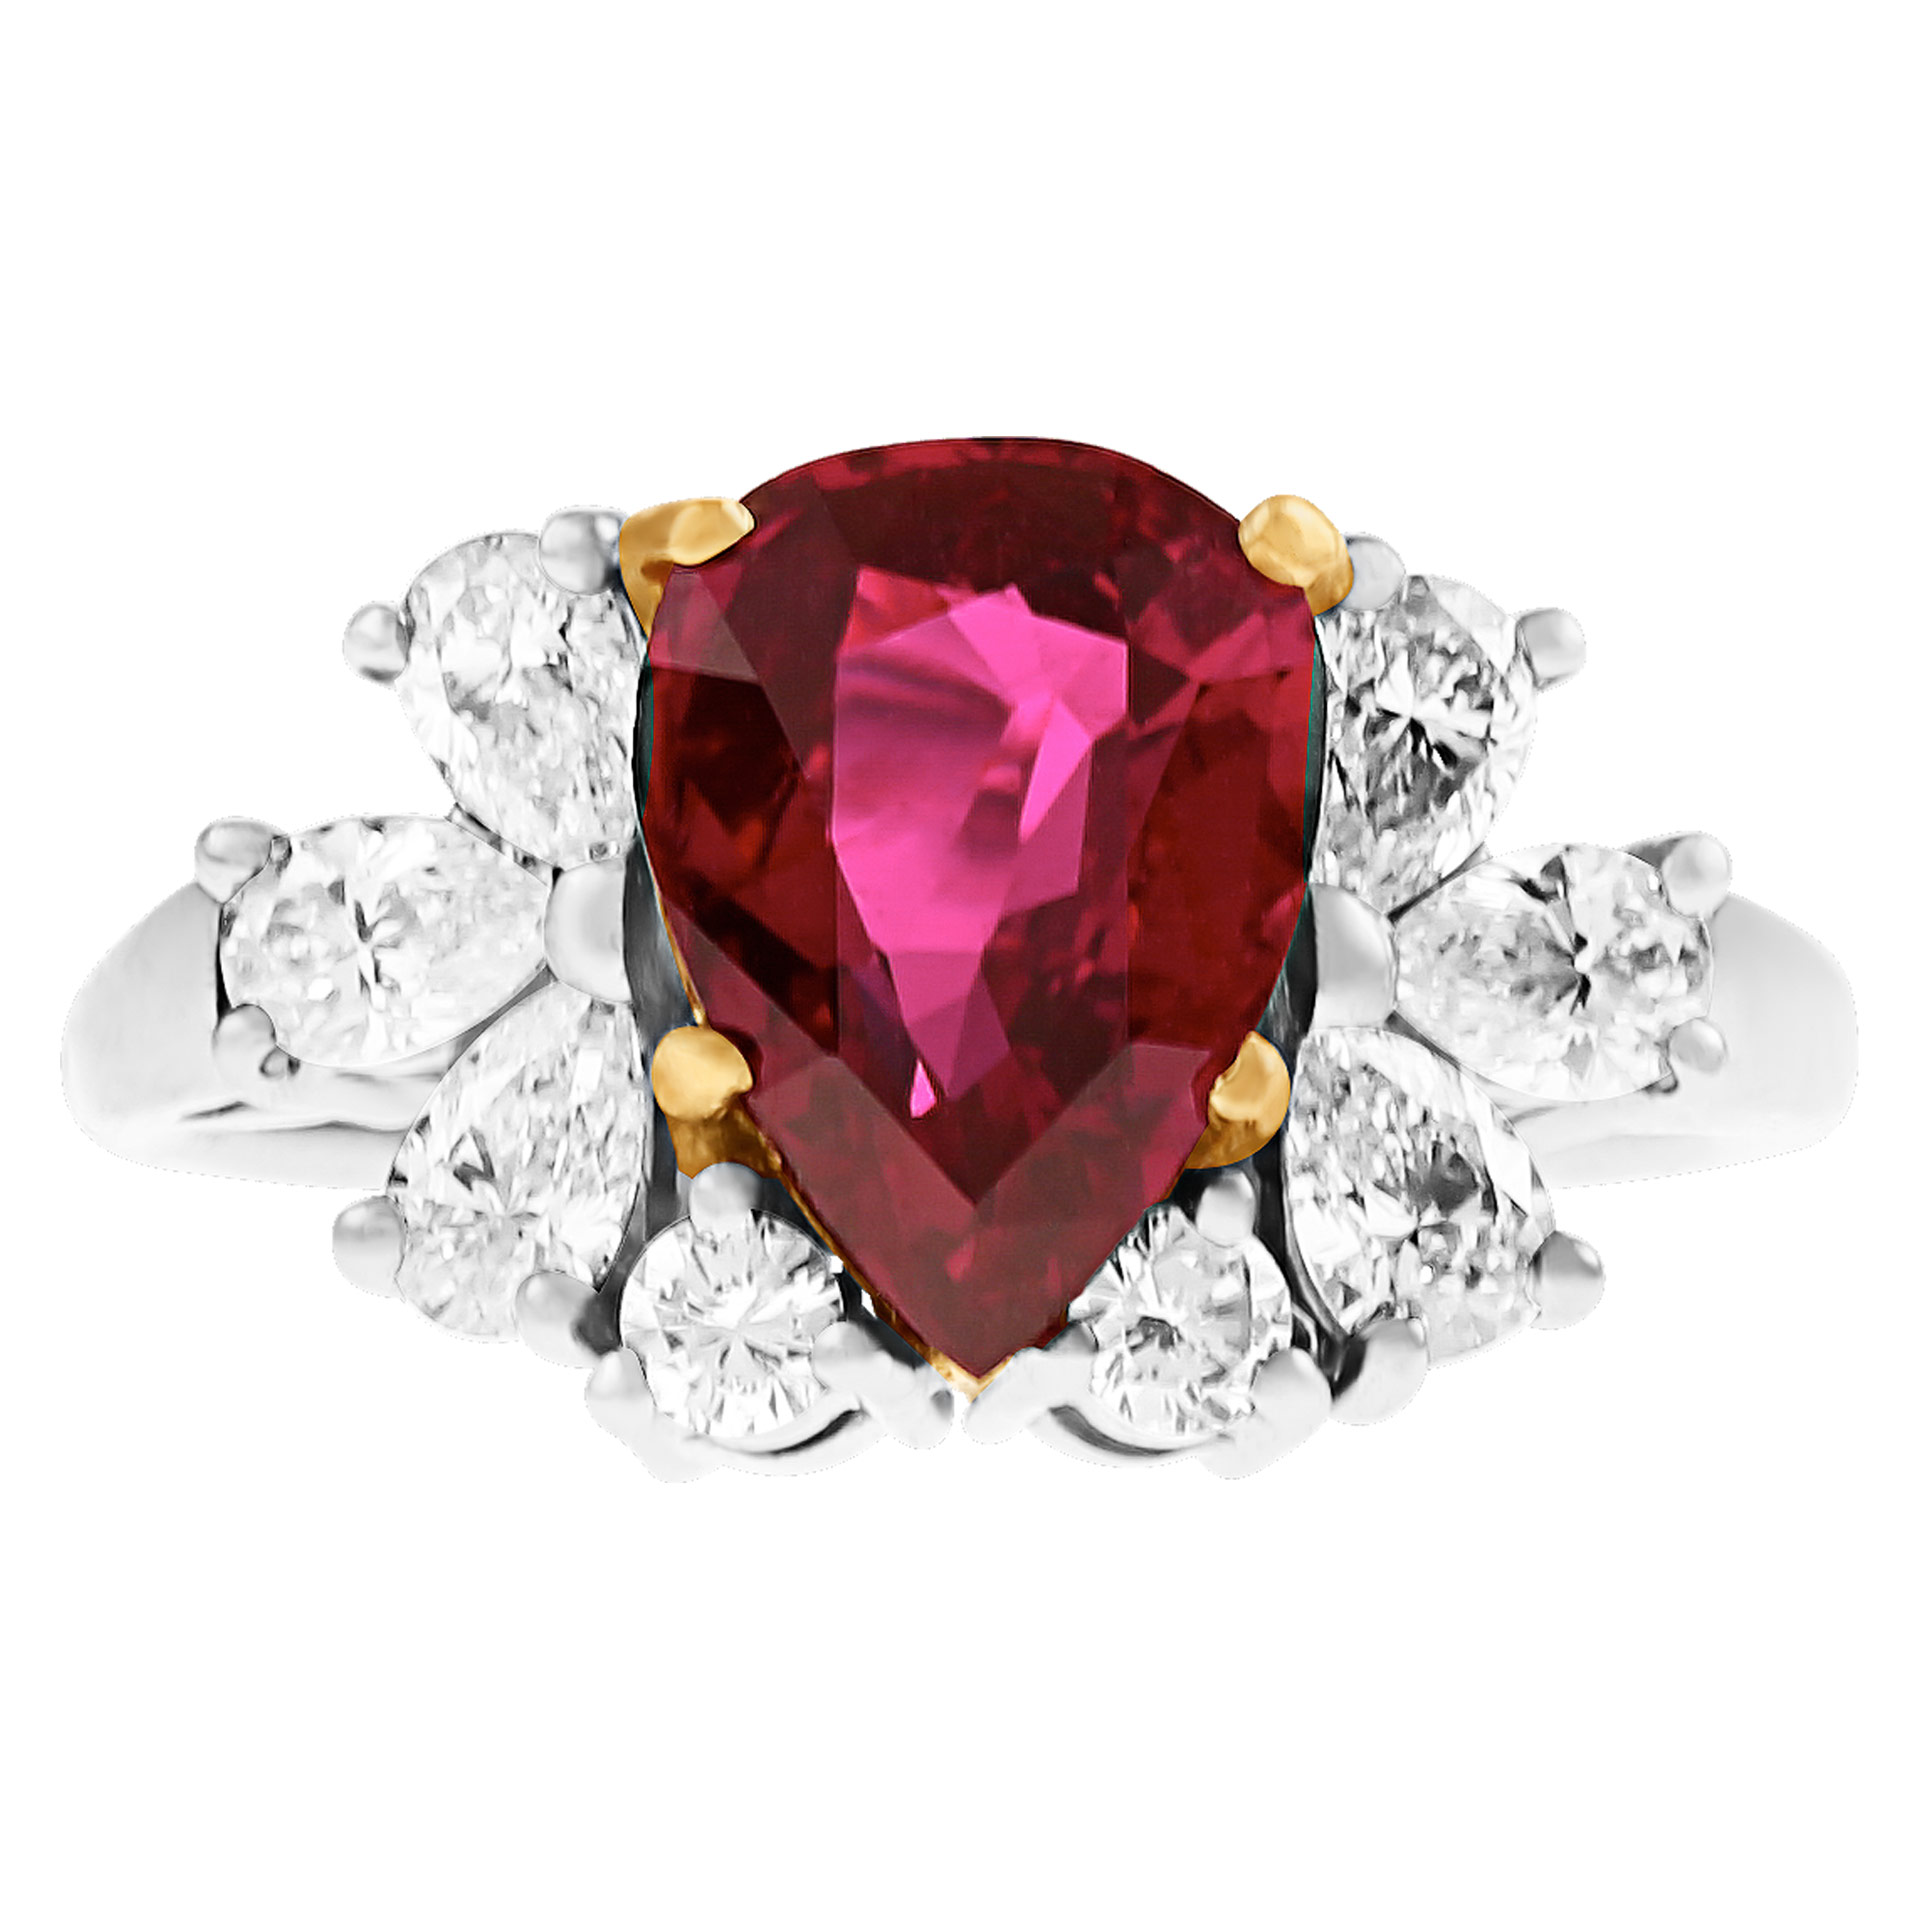 AGL Ceritified Thai-heated ruby ring in 18k & platinum. 2.83 carat pear shaped ruby. 1.50 cts in dia image 1